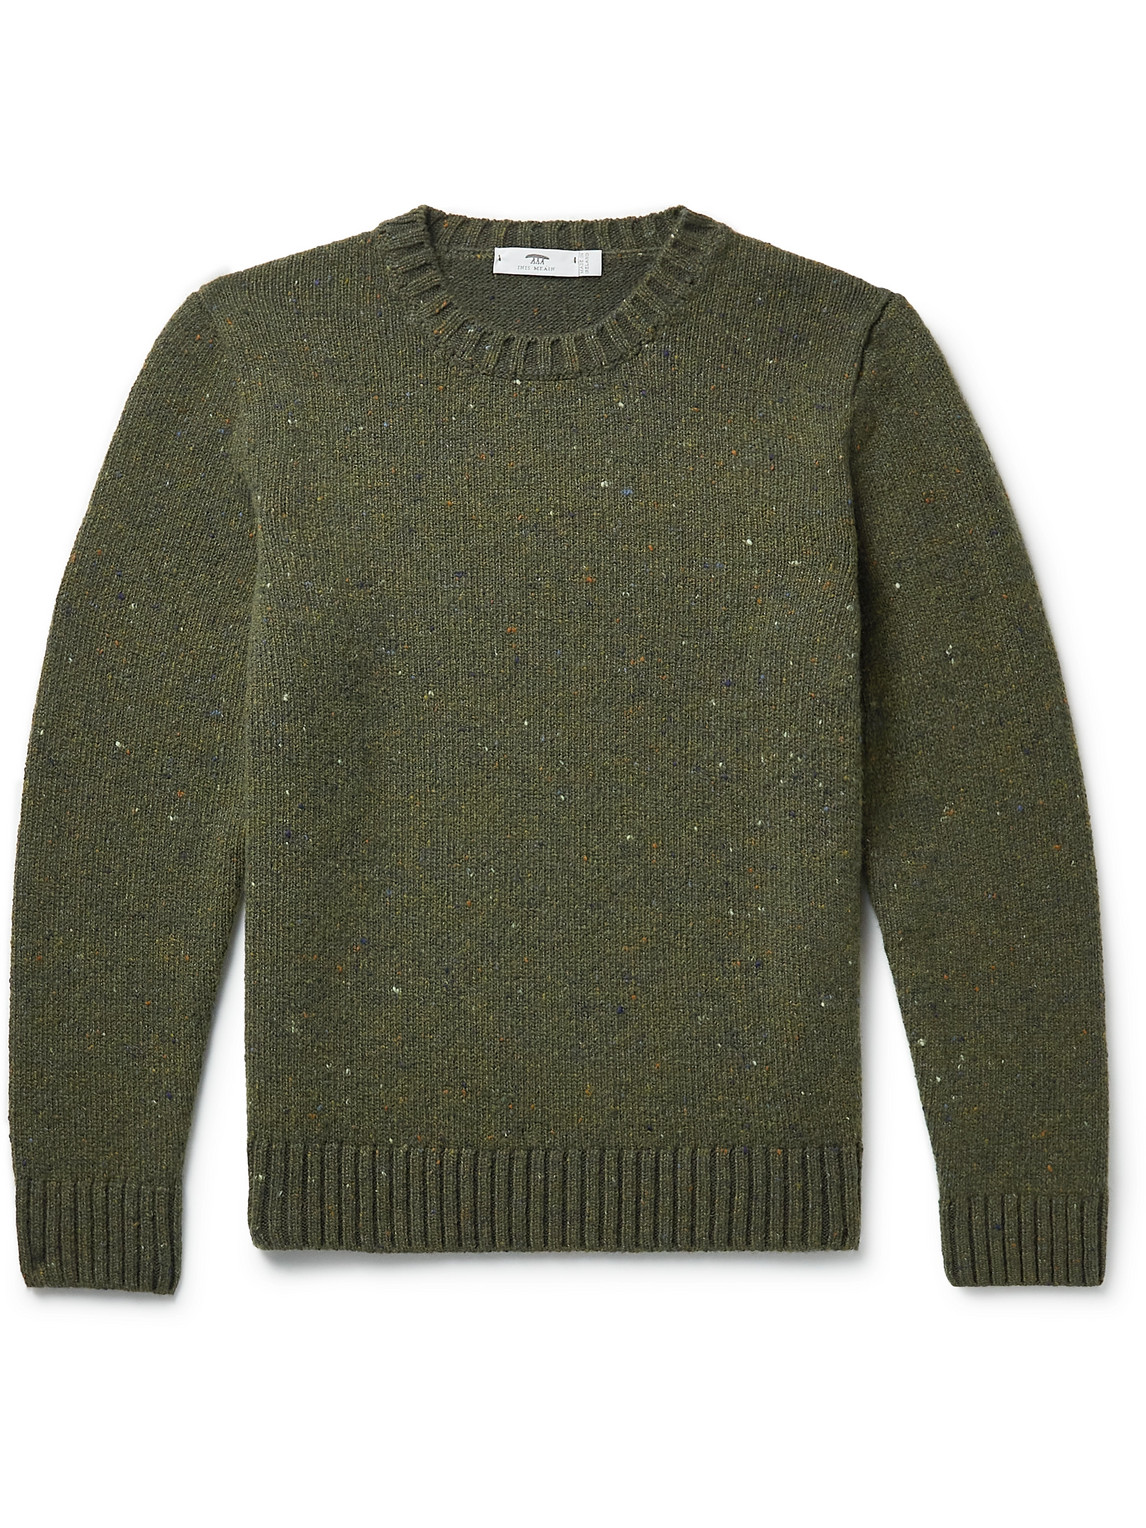 Inis Meain Donegal Merino Wool And Cashmere-blend Sweater In Green